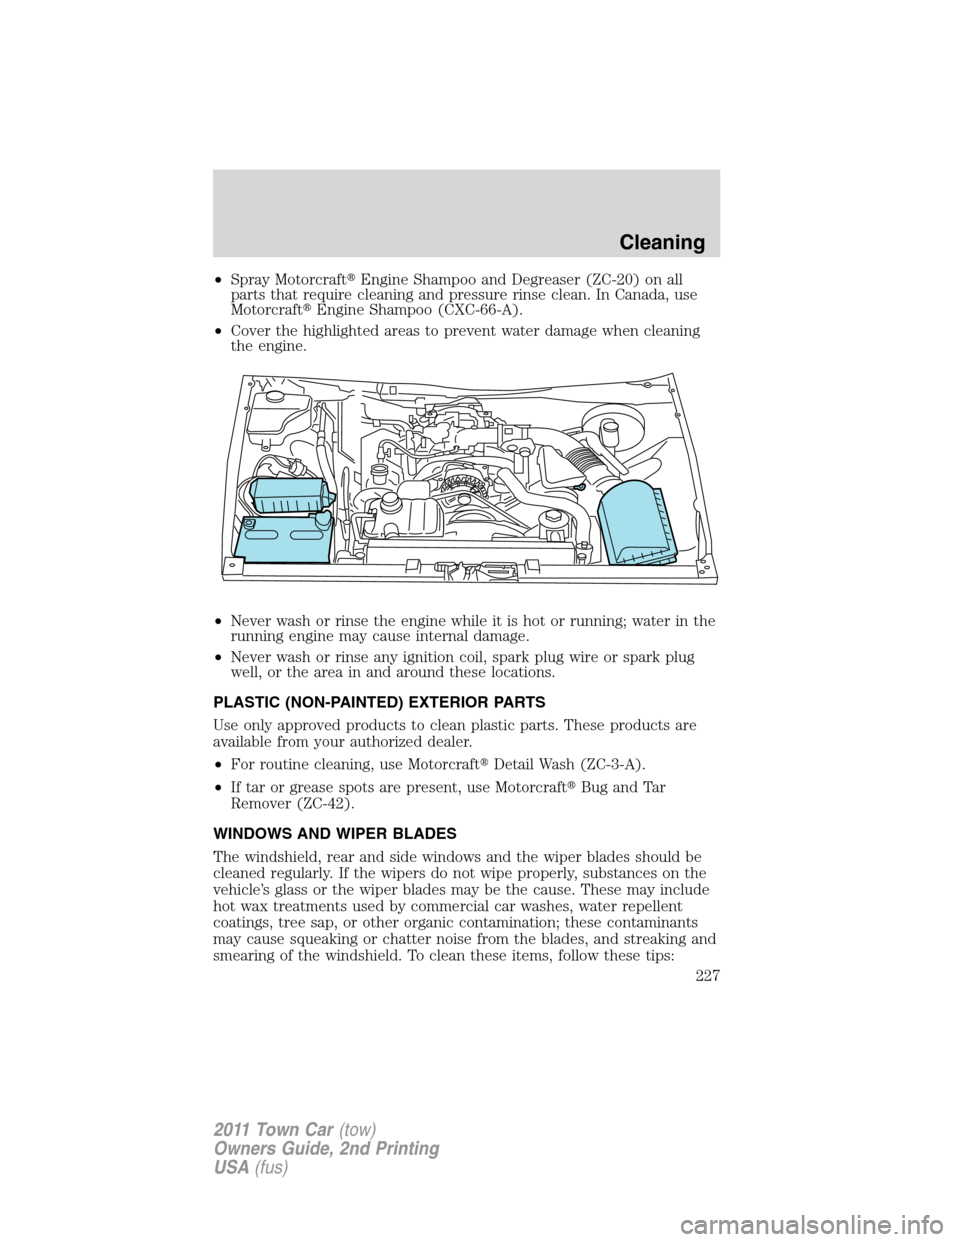 LINCOLN TOWN CAR 2011  Owners Manual •Spray MotorcraftEngine Shampoo and Degreaser (ZC-20) on all
parts that require cleaning and pressure rinse clean. In Canada, use
MotorcraftEngine Shampoo (CXC-66-A).
•Cover the highlighted area